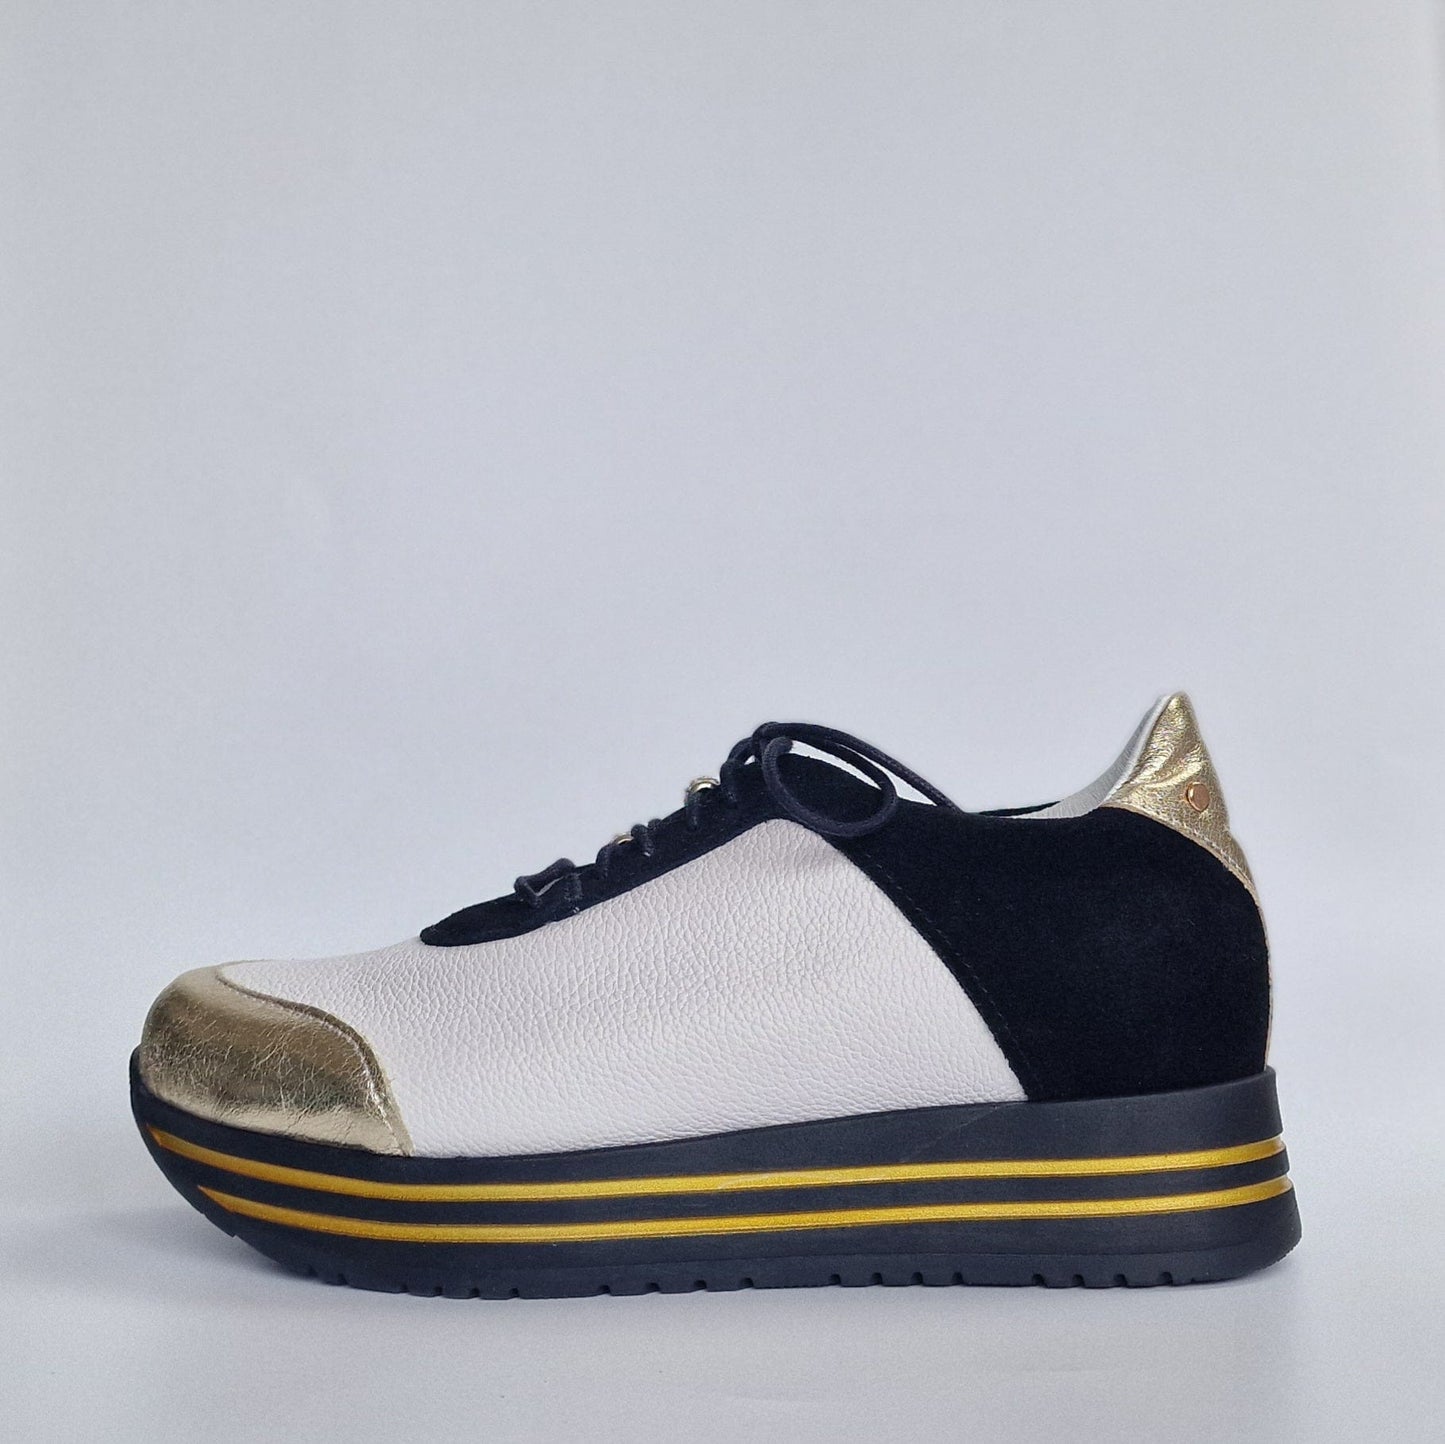 Gold and white leather ladies petite sneaker shoes